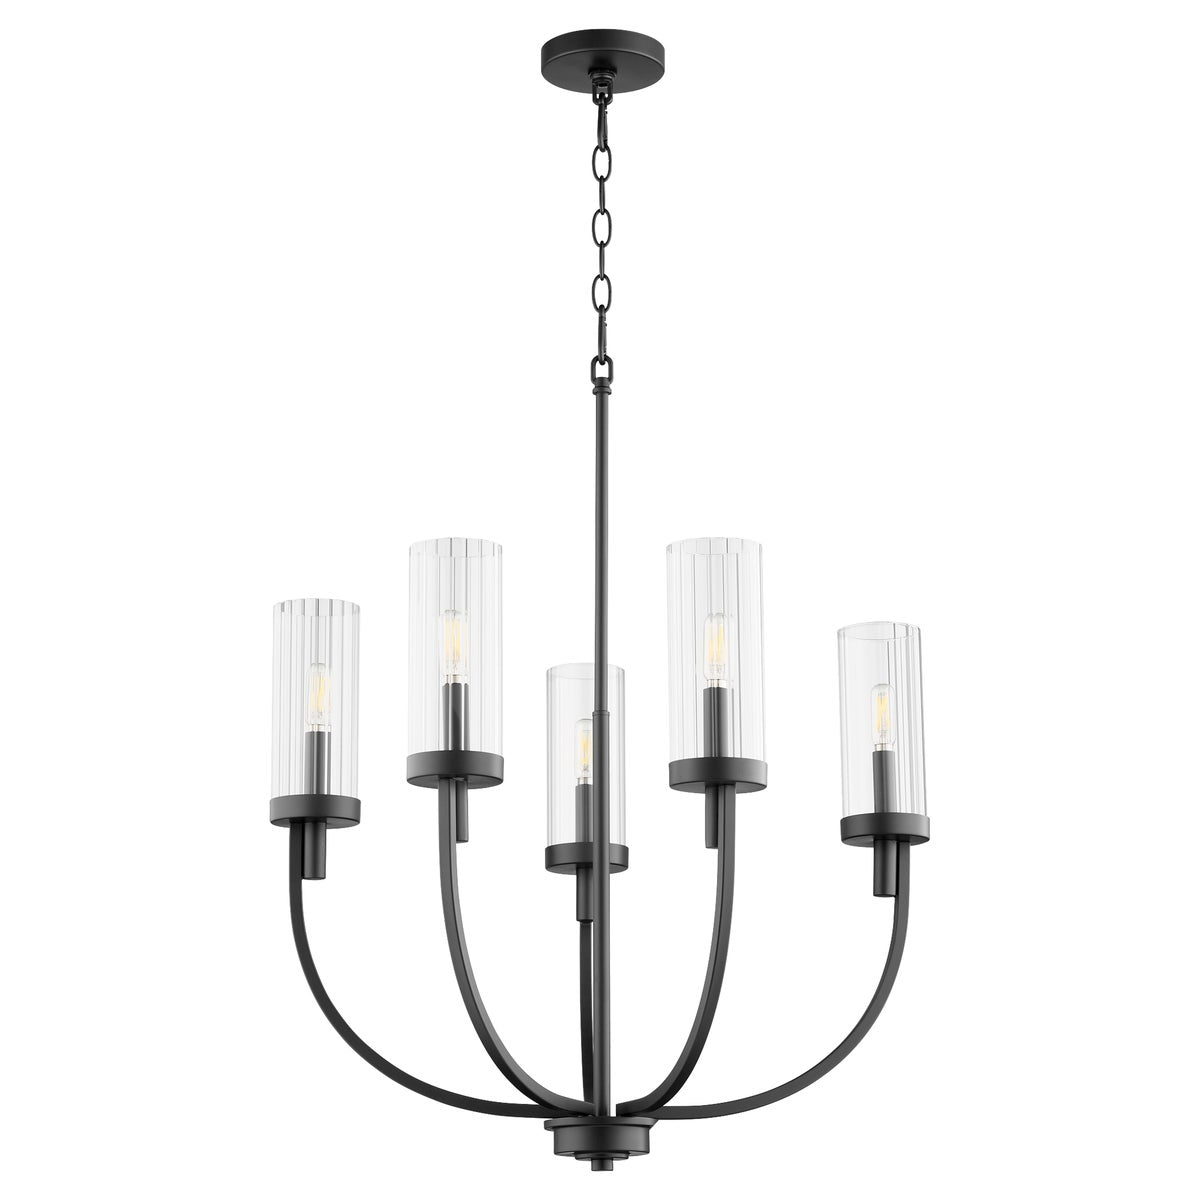 Kitchen Chandelier with clear glass shades and tubes, showcasing a close-up of a light bulb. Creates a serene atmosphere with rounded angles and bold lines. Perfect for kitchens.